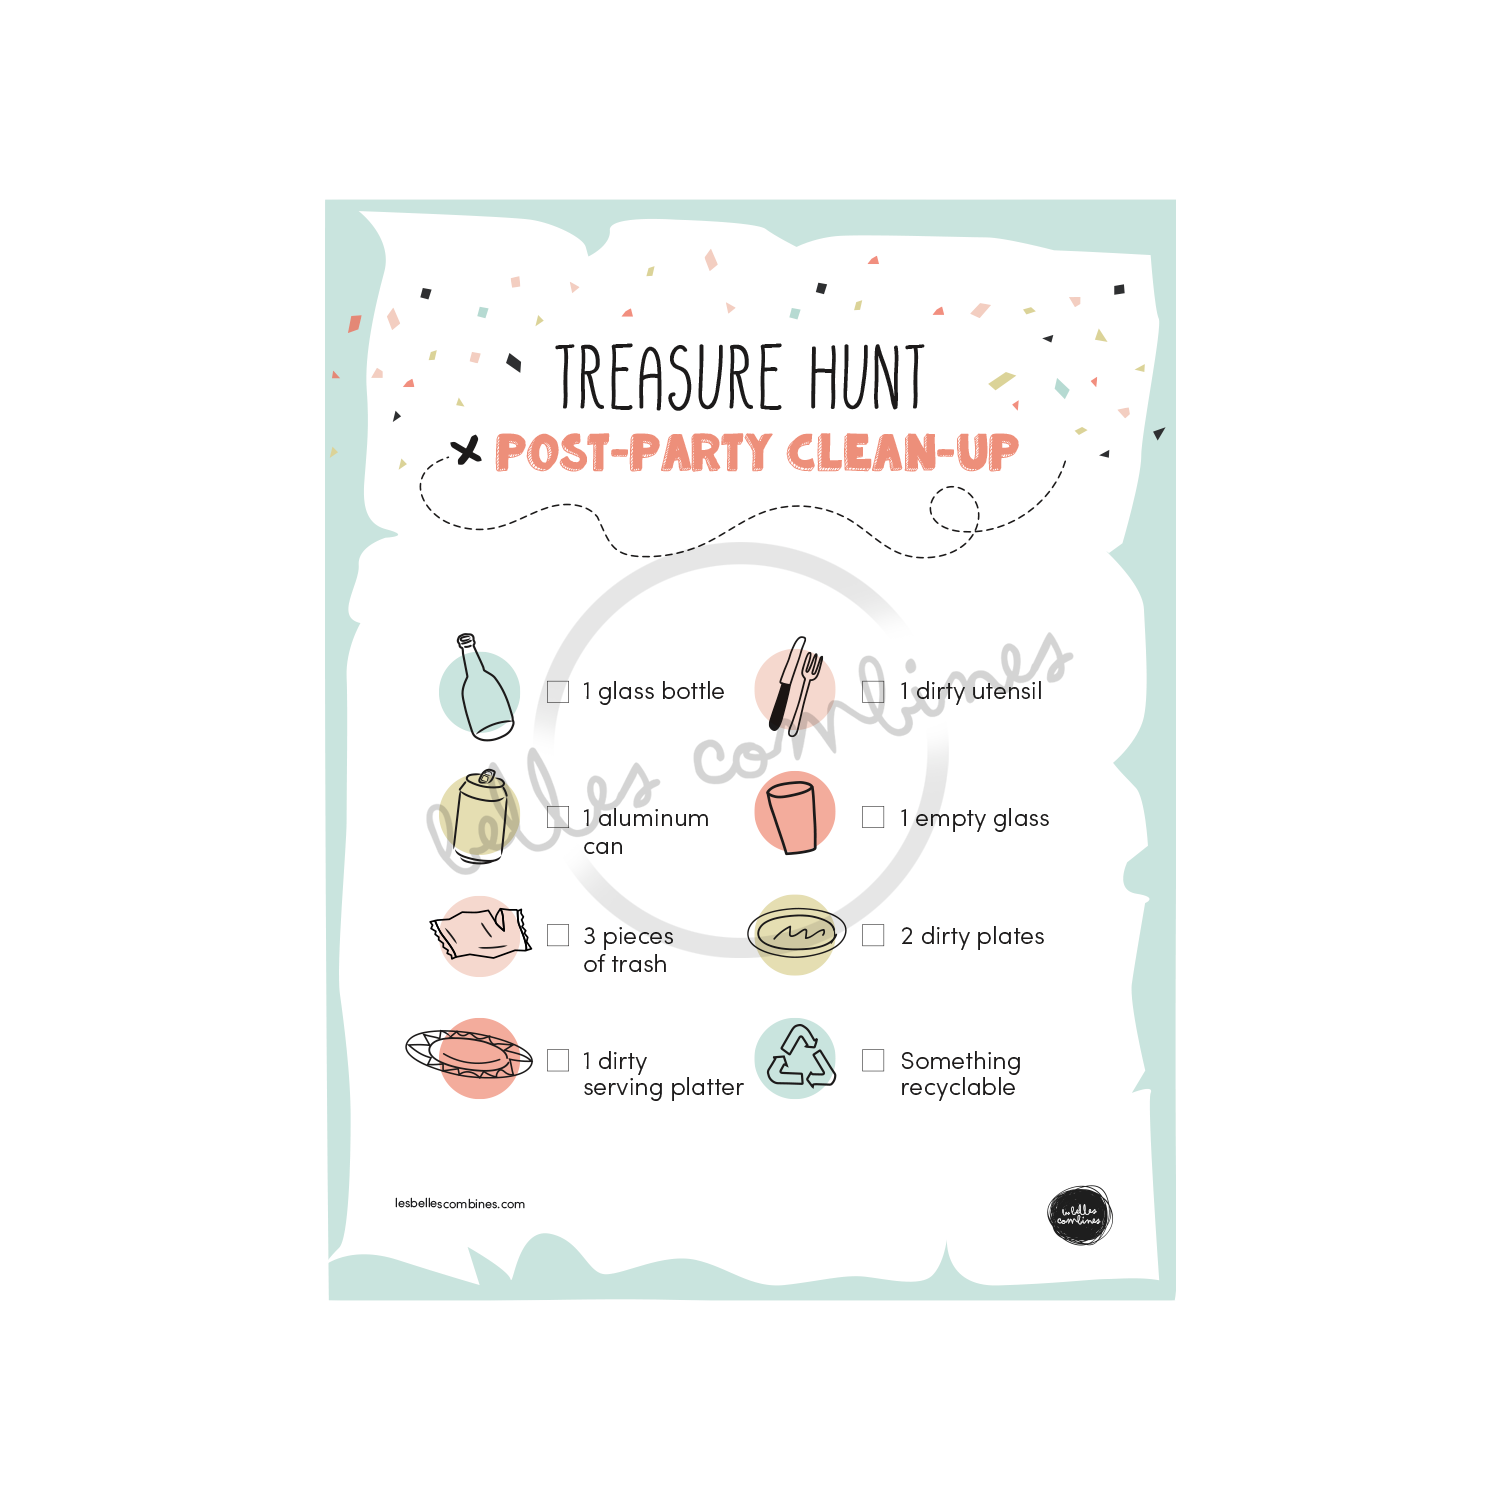 English version of the treasure hunt post-party clean-up document made by Les Belles Combines